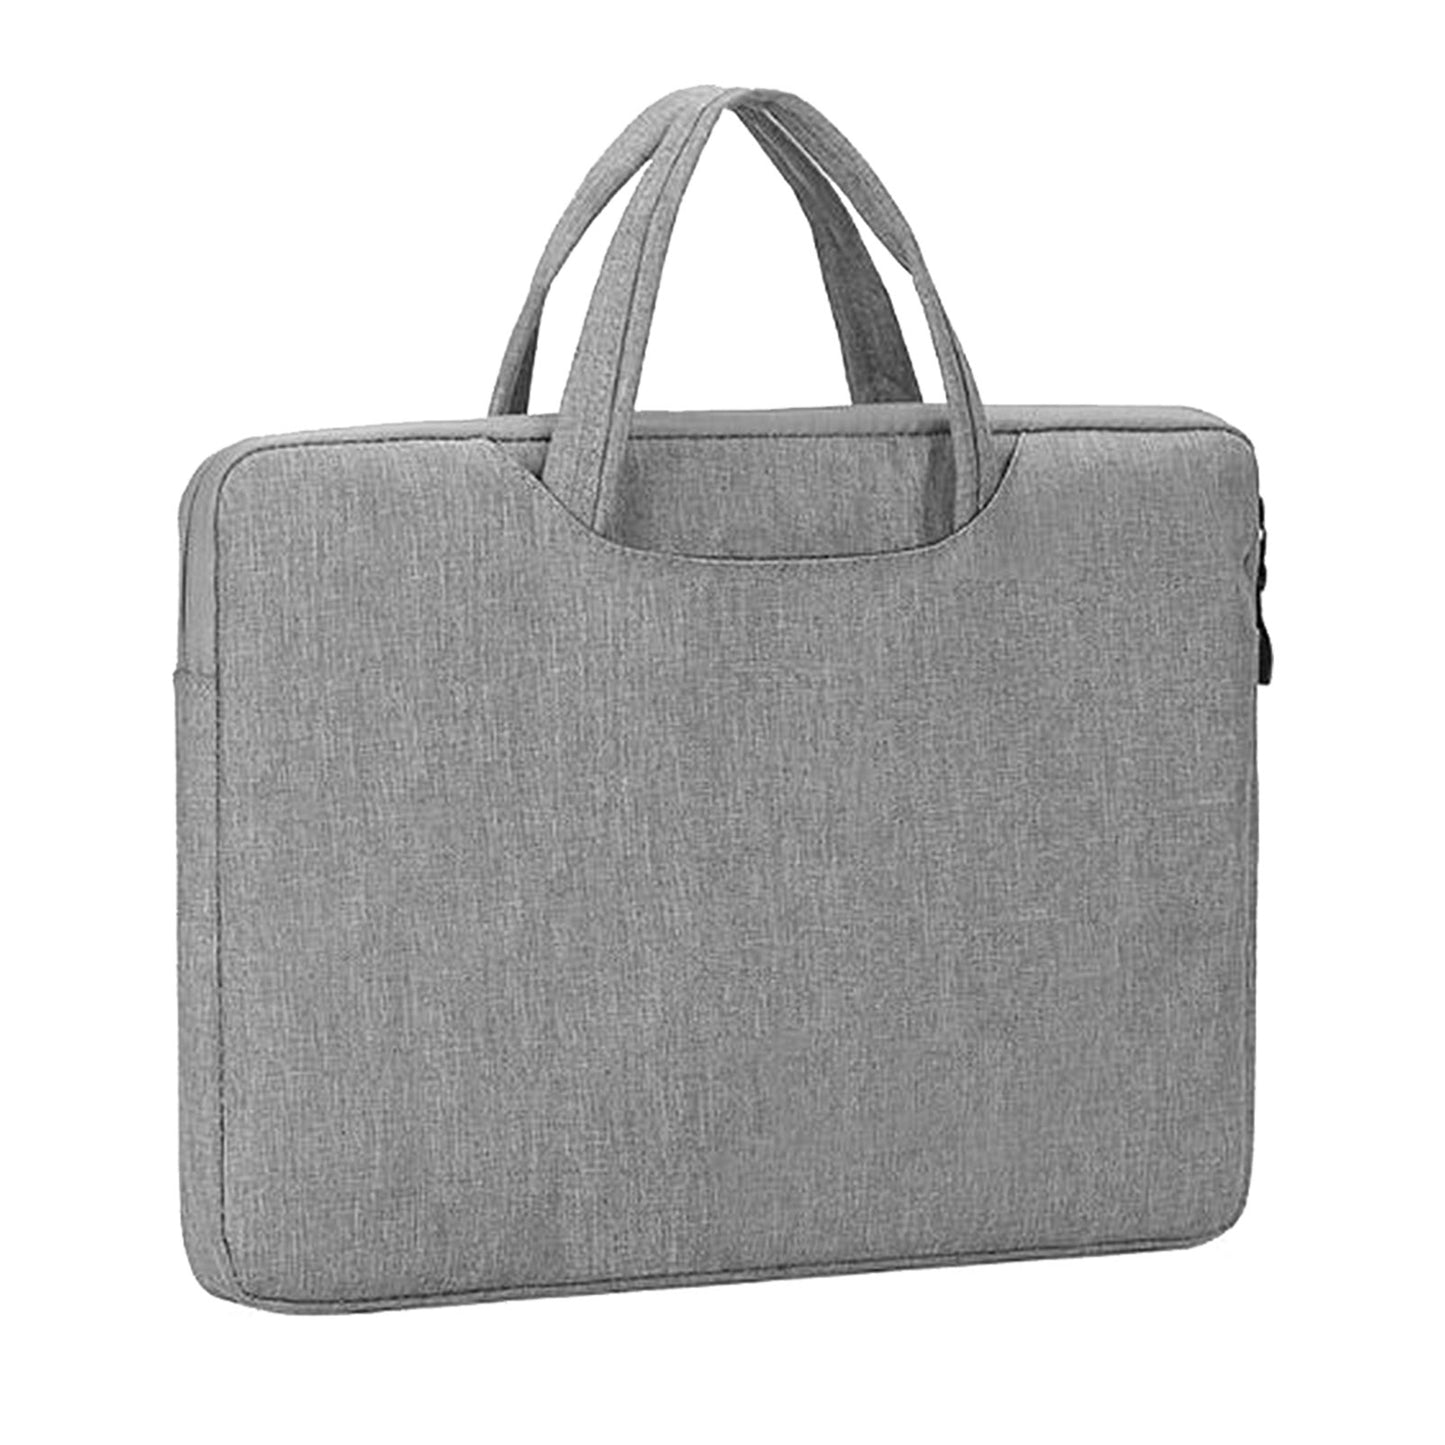 Prevo 15.6 Inch Laptop Bag, Cushioned Lining, With Shoulder Strap